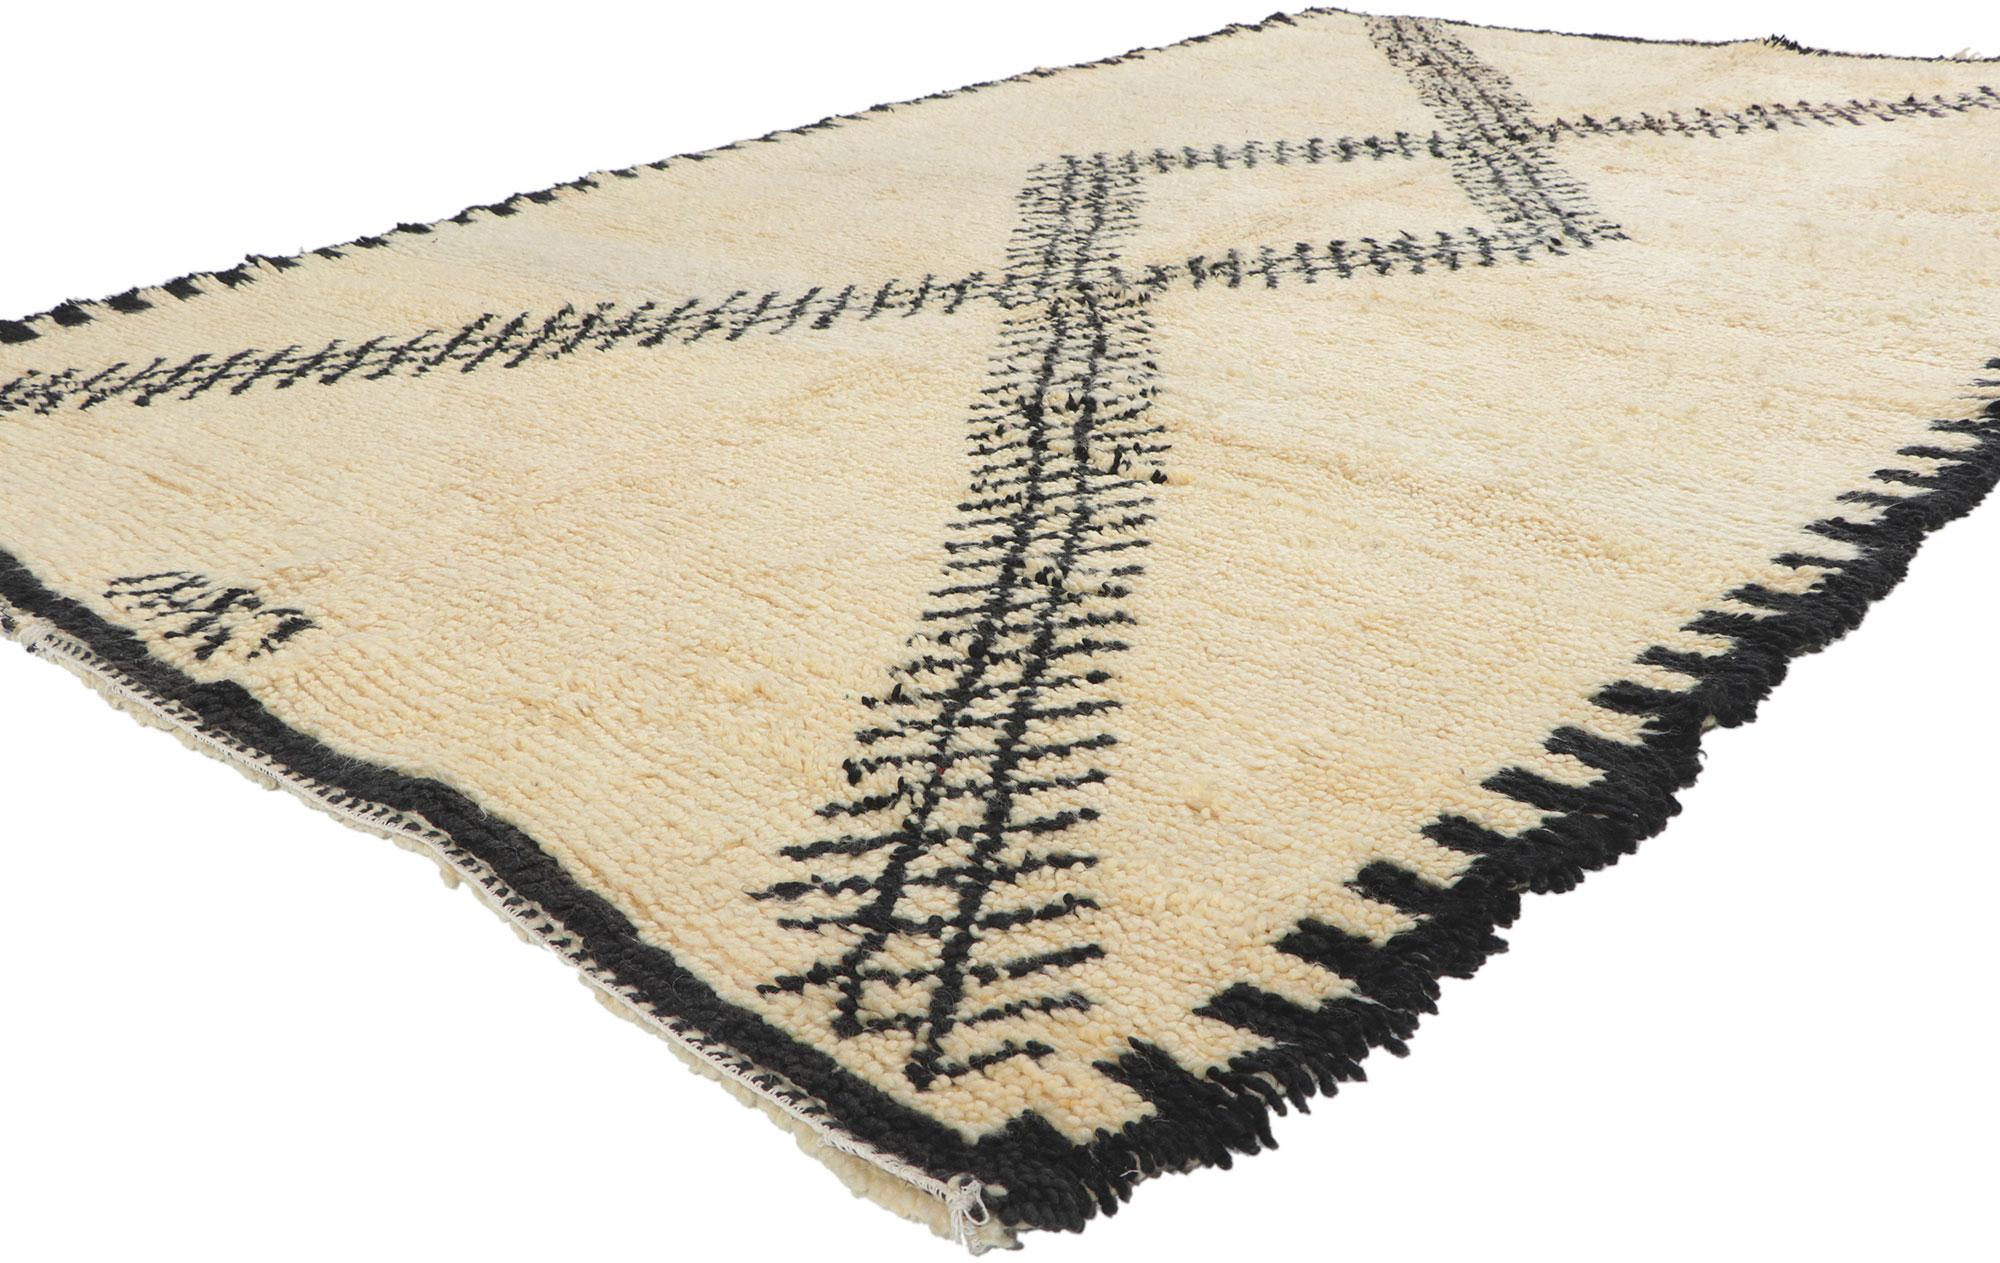 78380 Vintage Moroccan Beni Ourain Rug, 06'02 x 09'10. ?With its simplicity, plush pile, incredible detail and texture, this hand knotted wool vintage Beni Ourain Moroccan rug is a captivating vision of woven beauty. The eye-catching diamond pattern